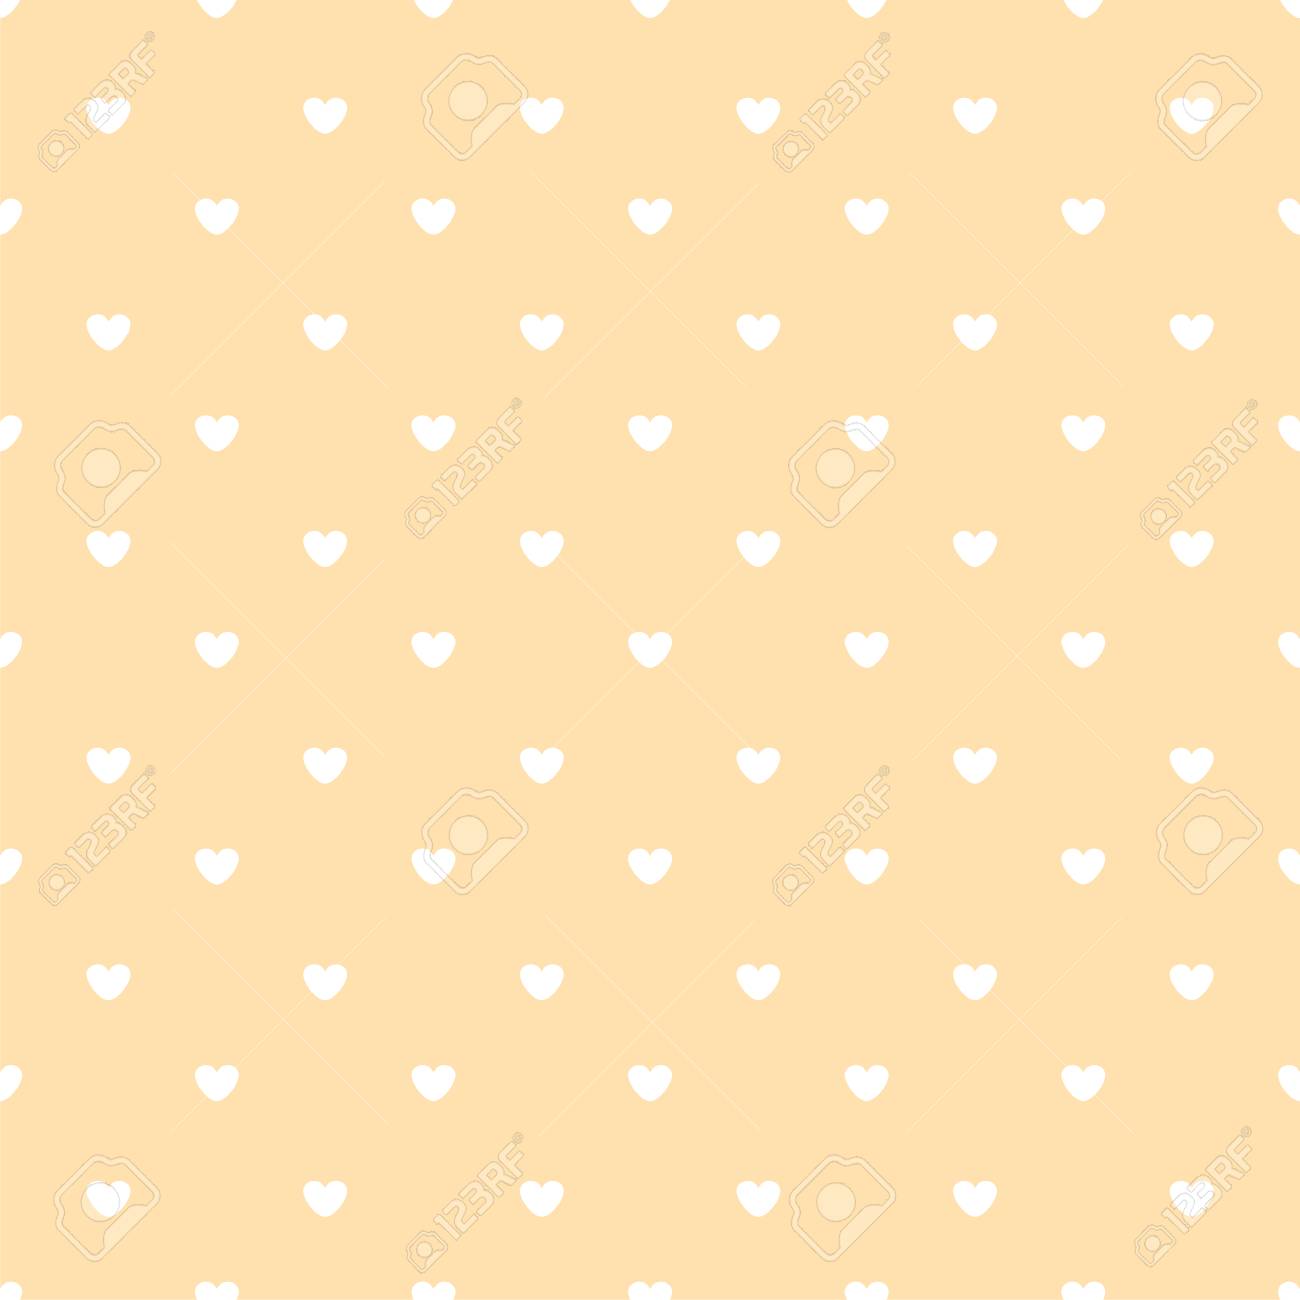 White Hearts On Peach Color Background Seamless Pattern Royalty